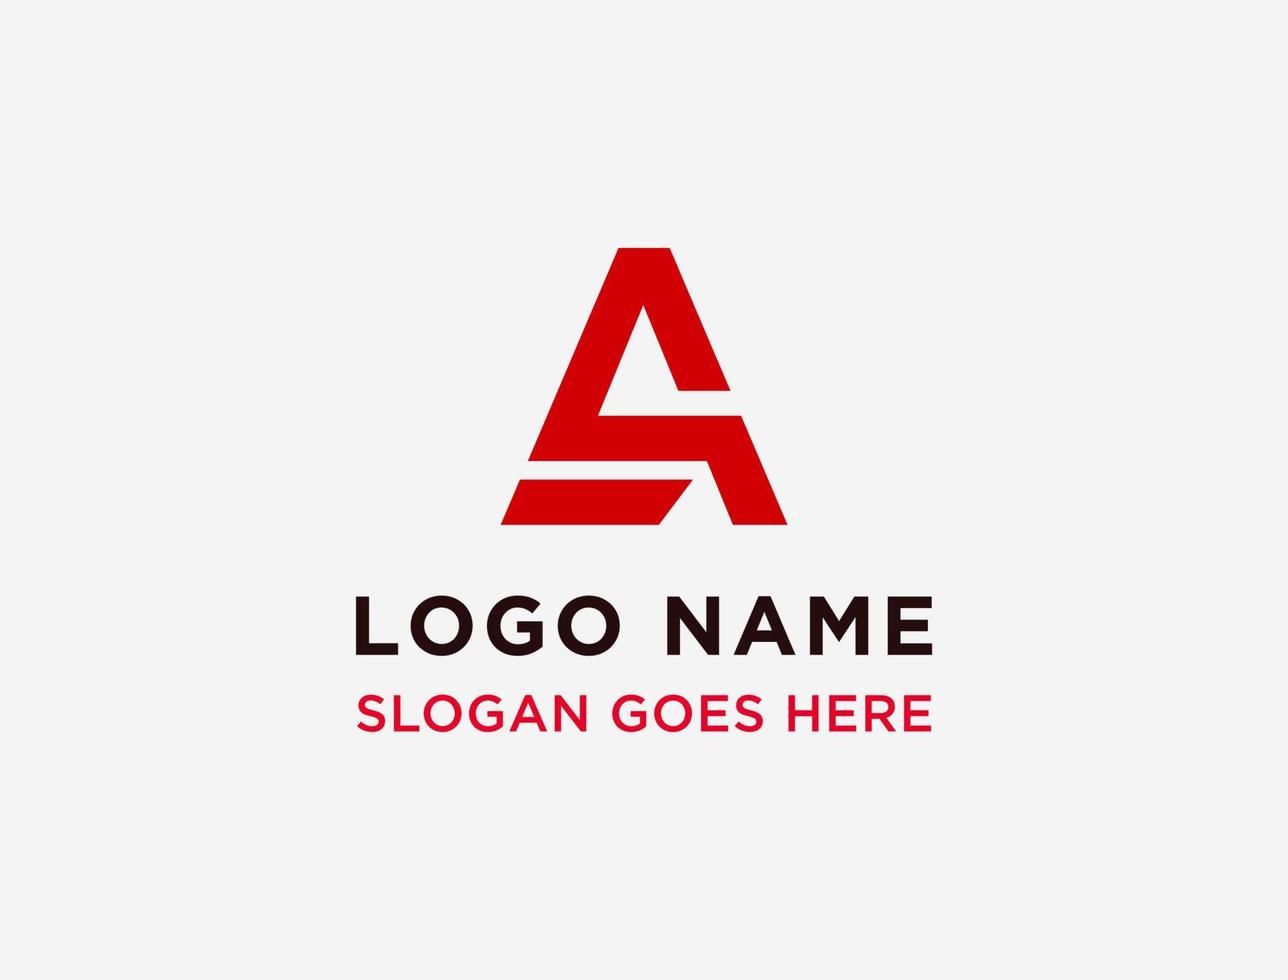 Simple letter A logo design template on white background. Suitable for sport and any brand logo and etc. vector